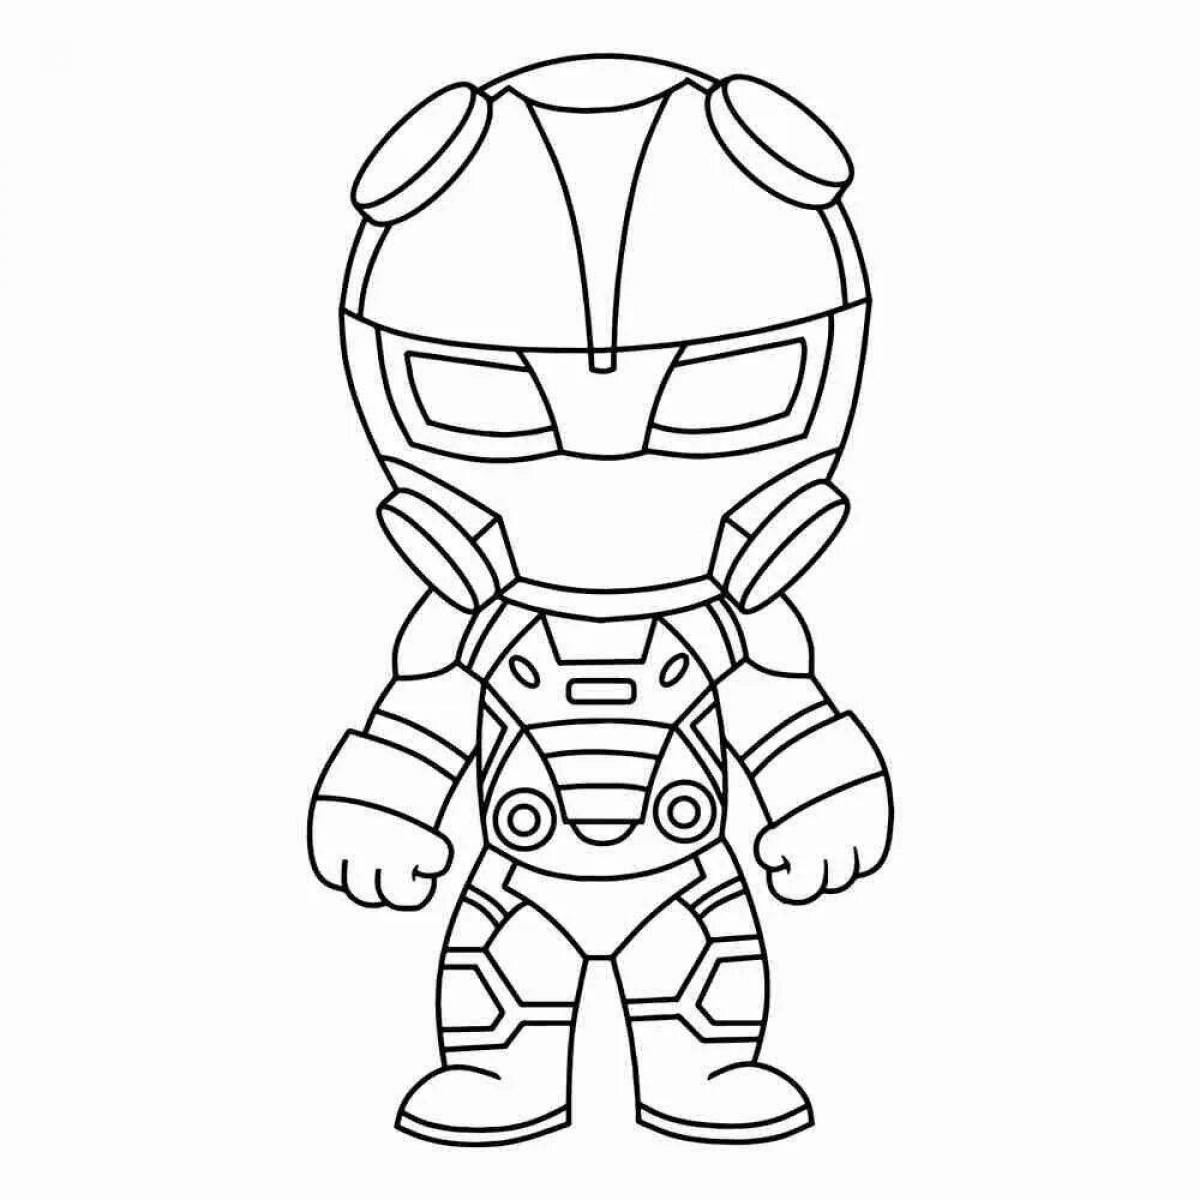 Brilliant ford knight coloring page